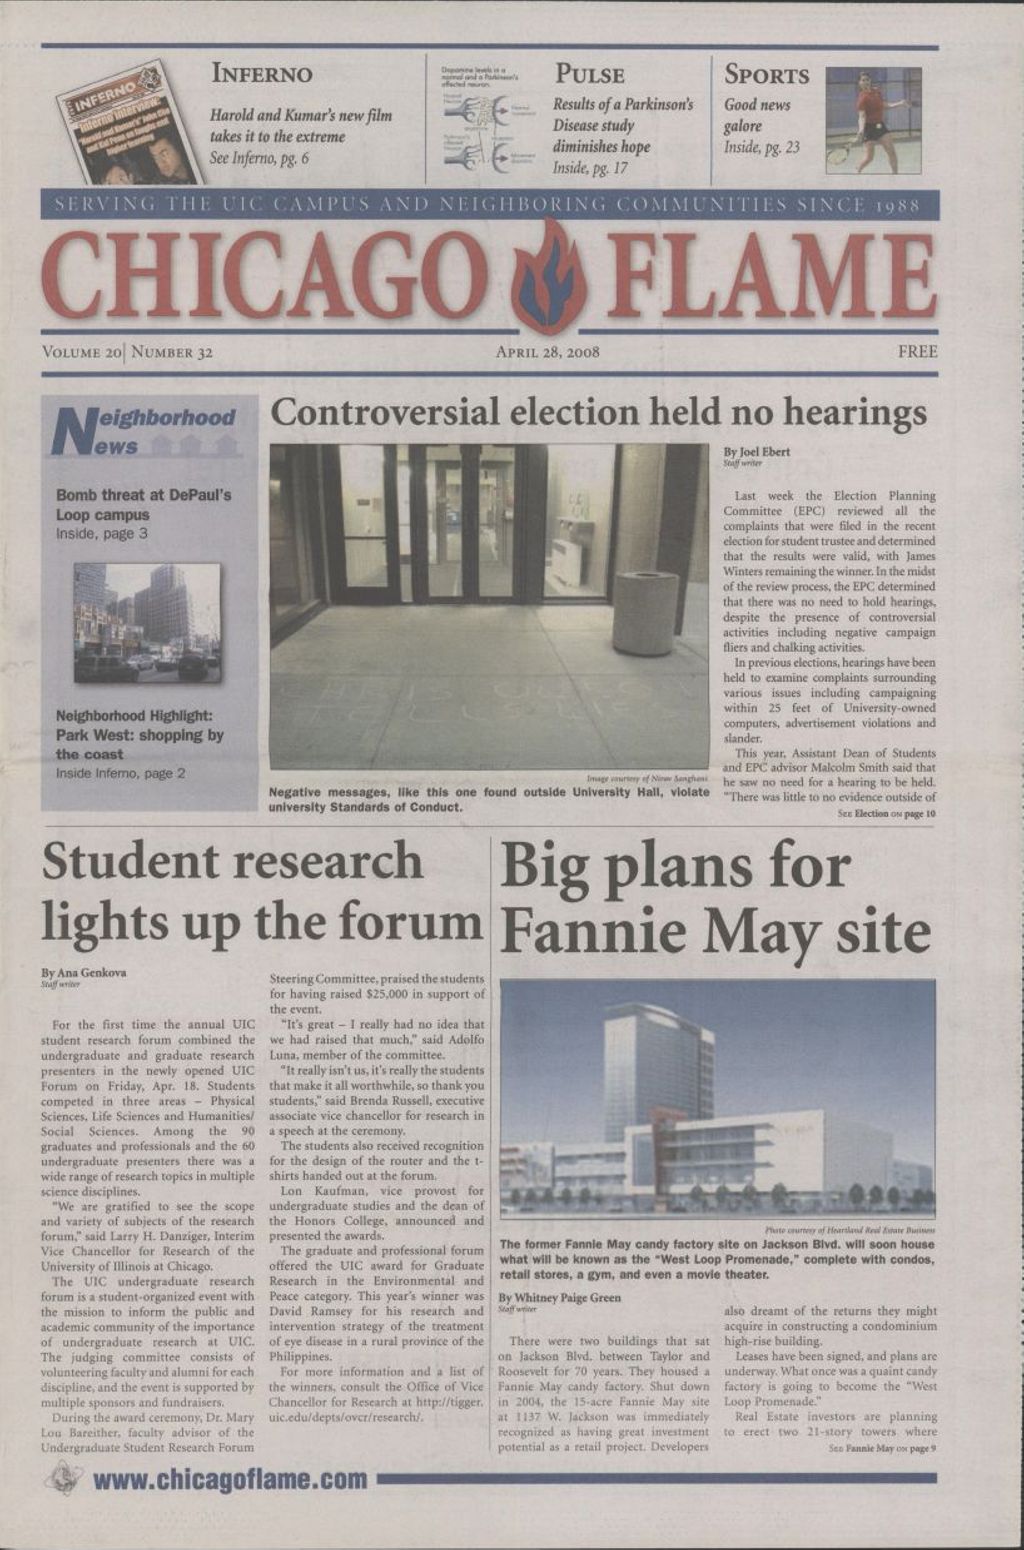 Chicago Flame (April 28, 2008)